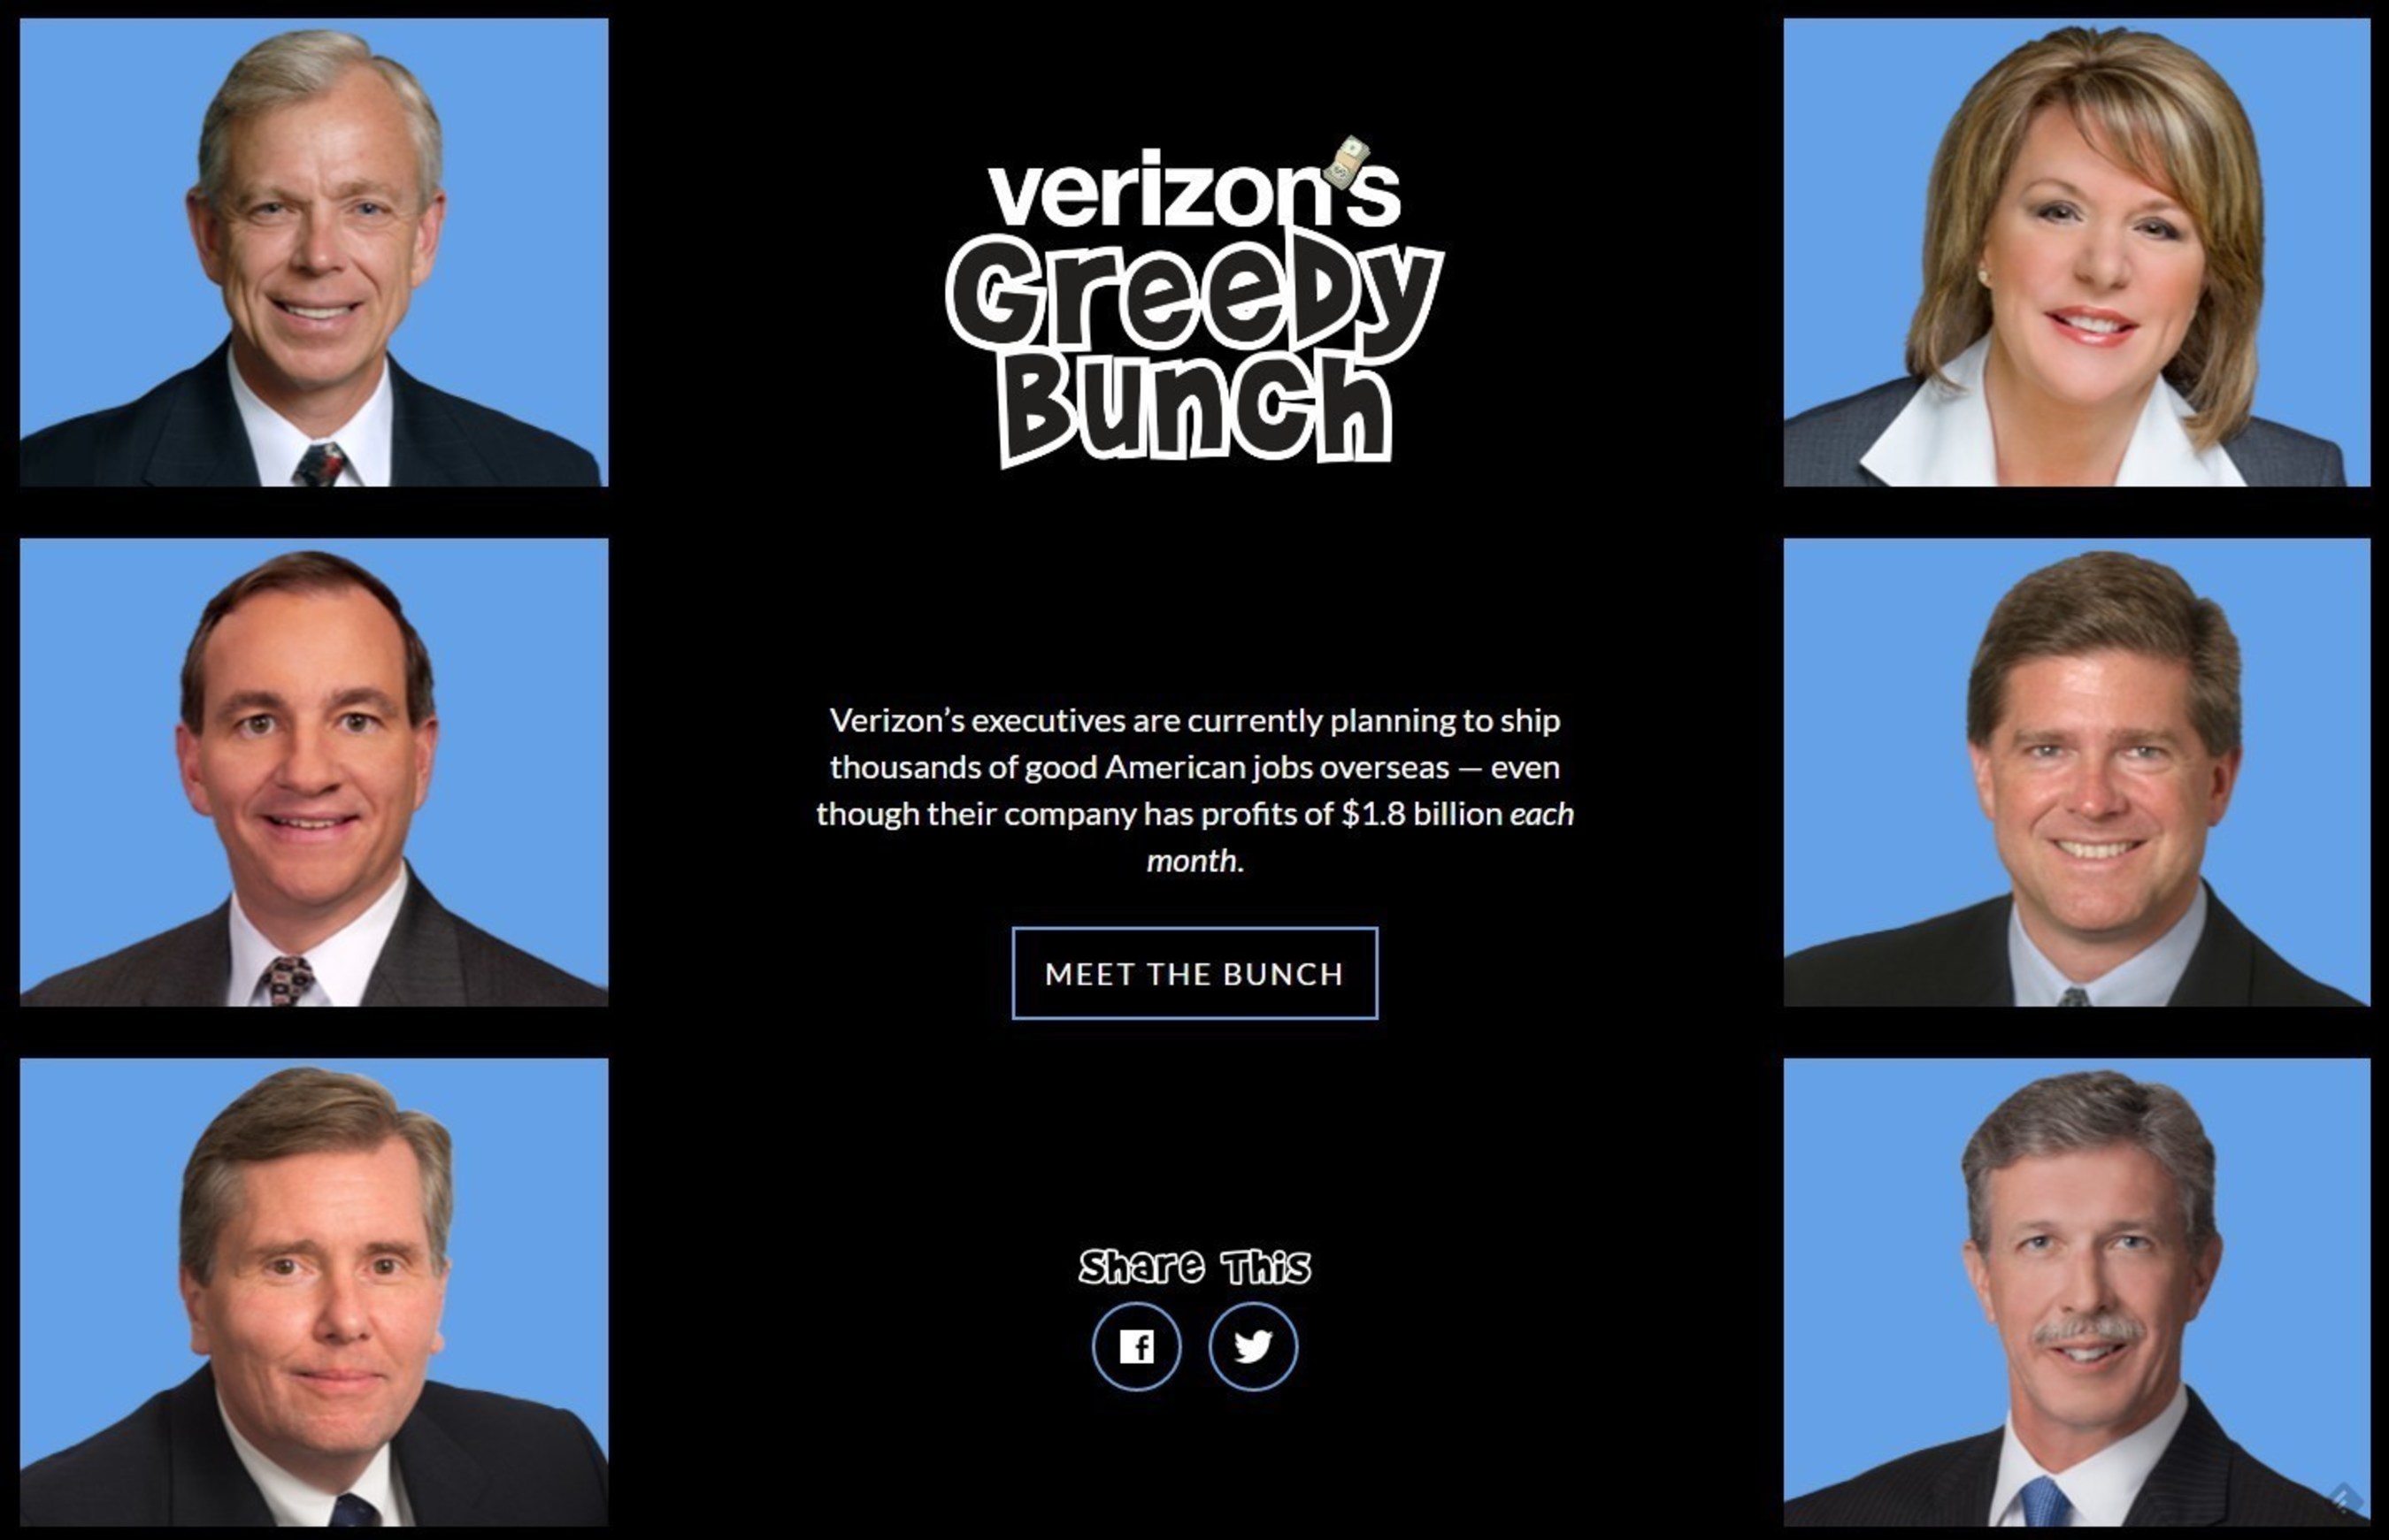 Verizon's Greedy Bunch: CWA Launches VerizonGreed.com As Verizon Moves to Cut Off Benefits for 100K Workers, Family Members